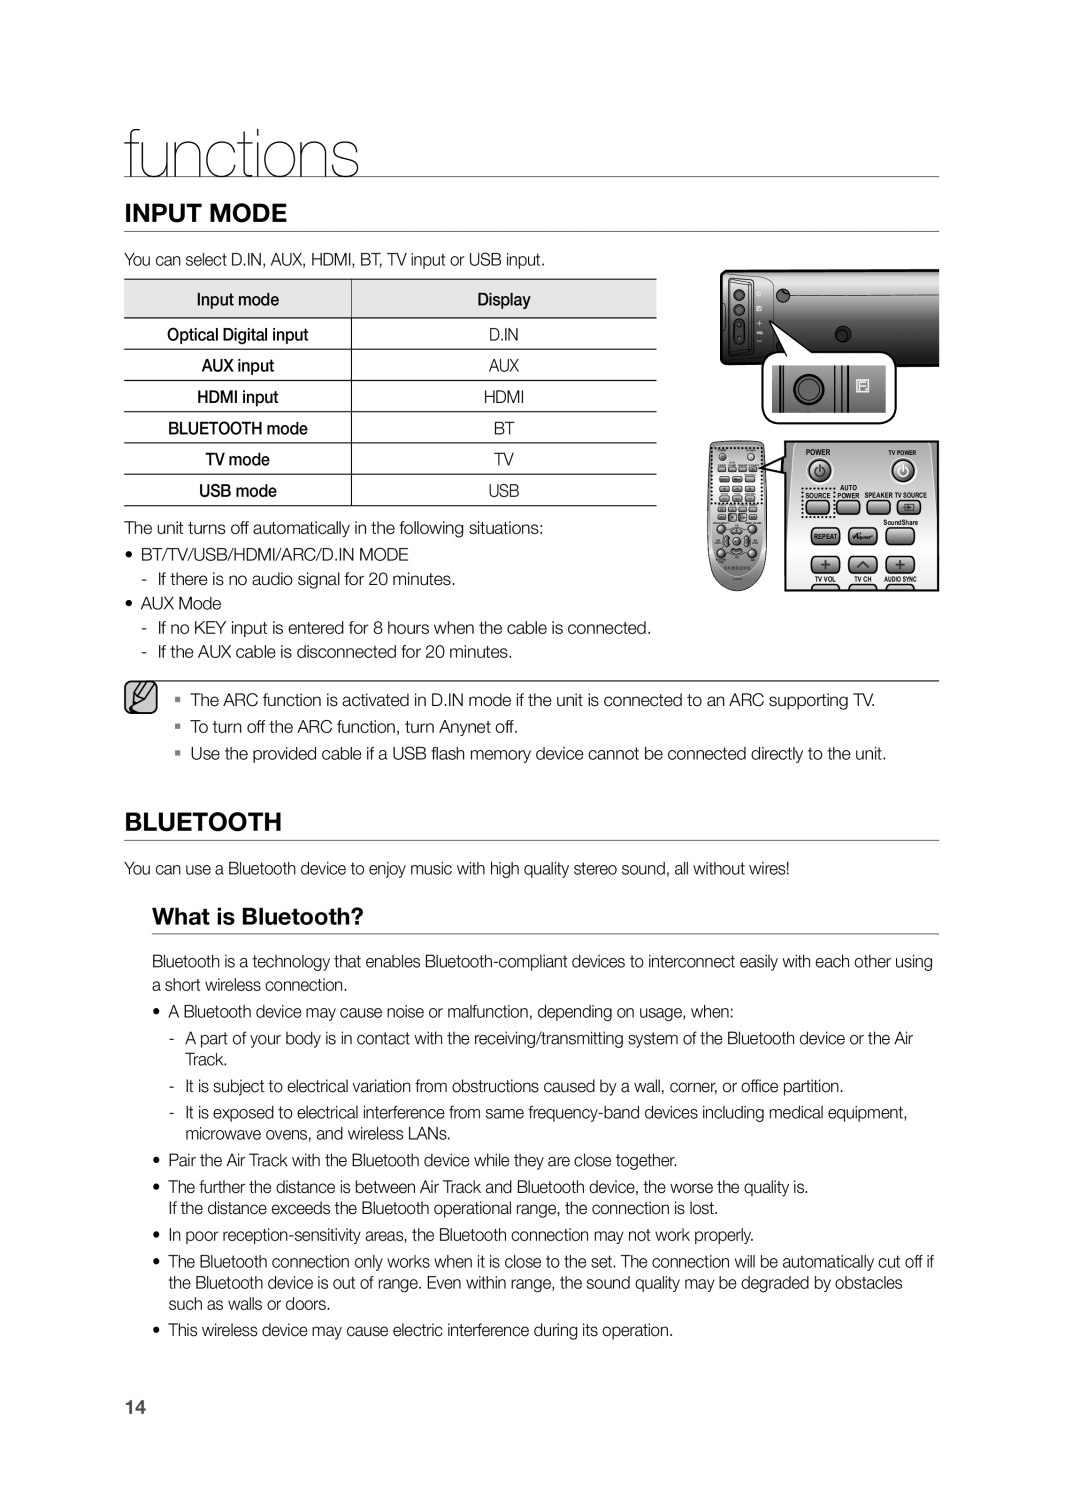 Samsung HWF450ZA user manual Functions, What is Bluetooth?, Unit turns off automatically in the following situations 